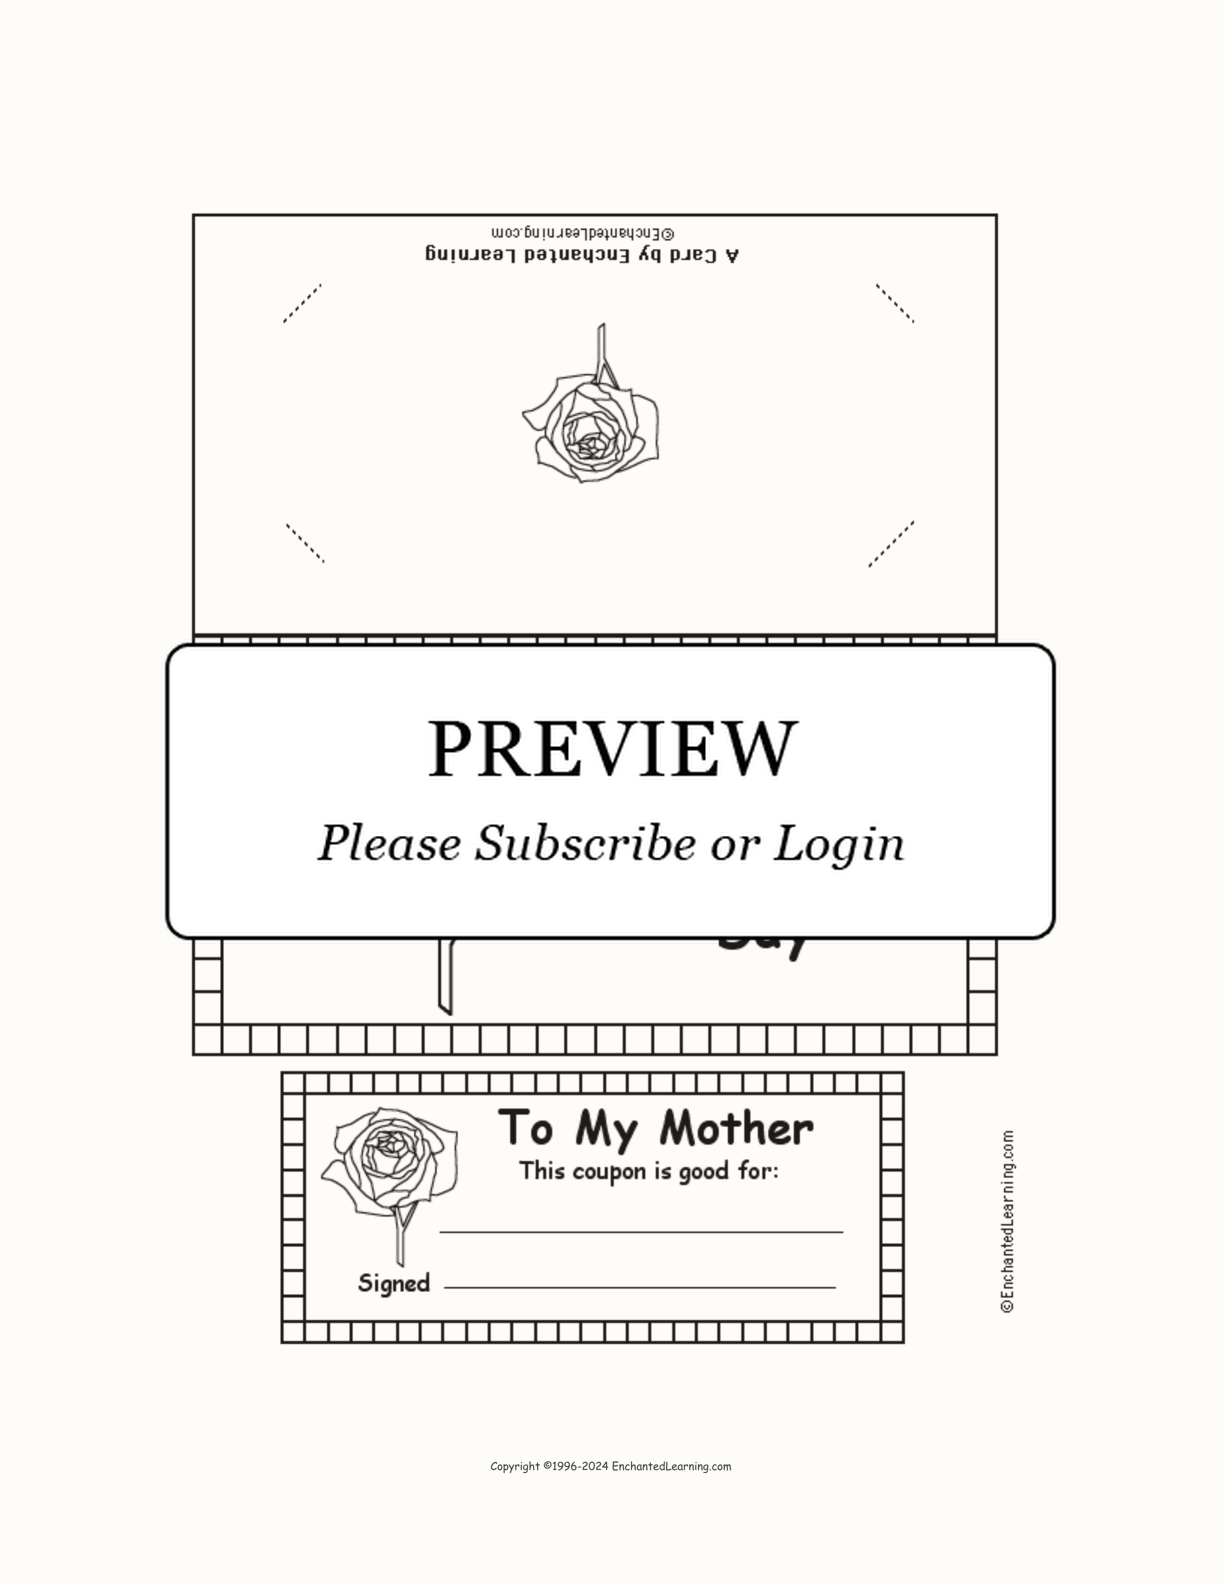 Mother's Day Coupon Card Template (in Black and White) interactive printout page 1